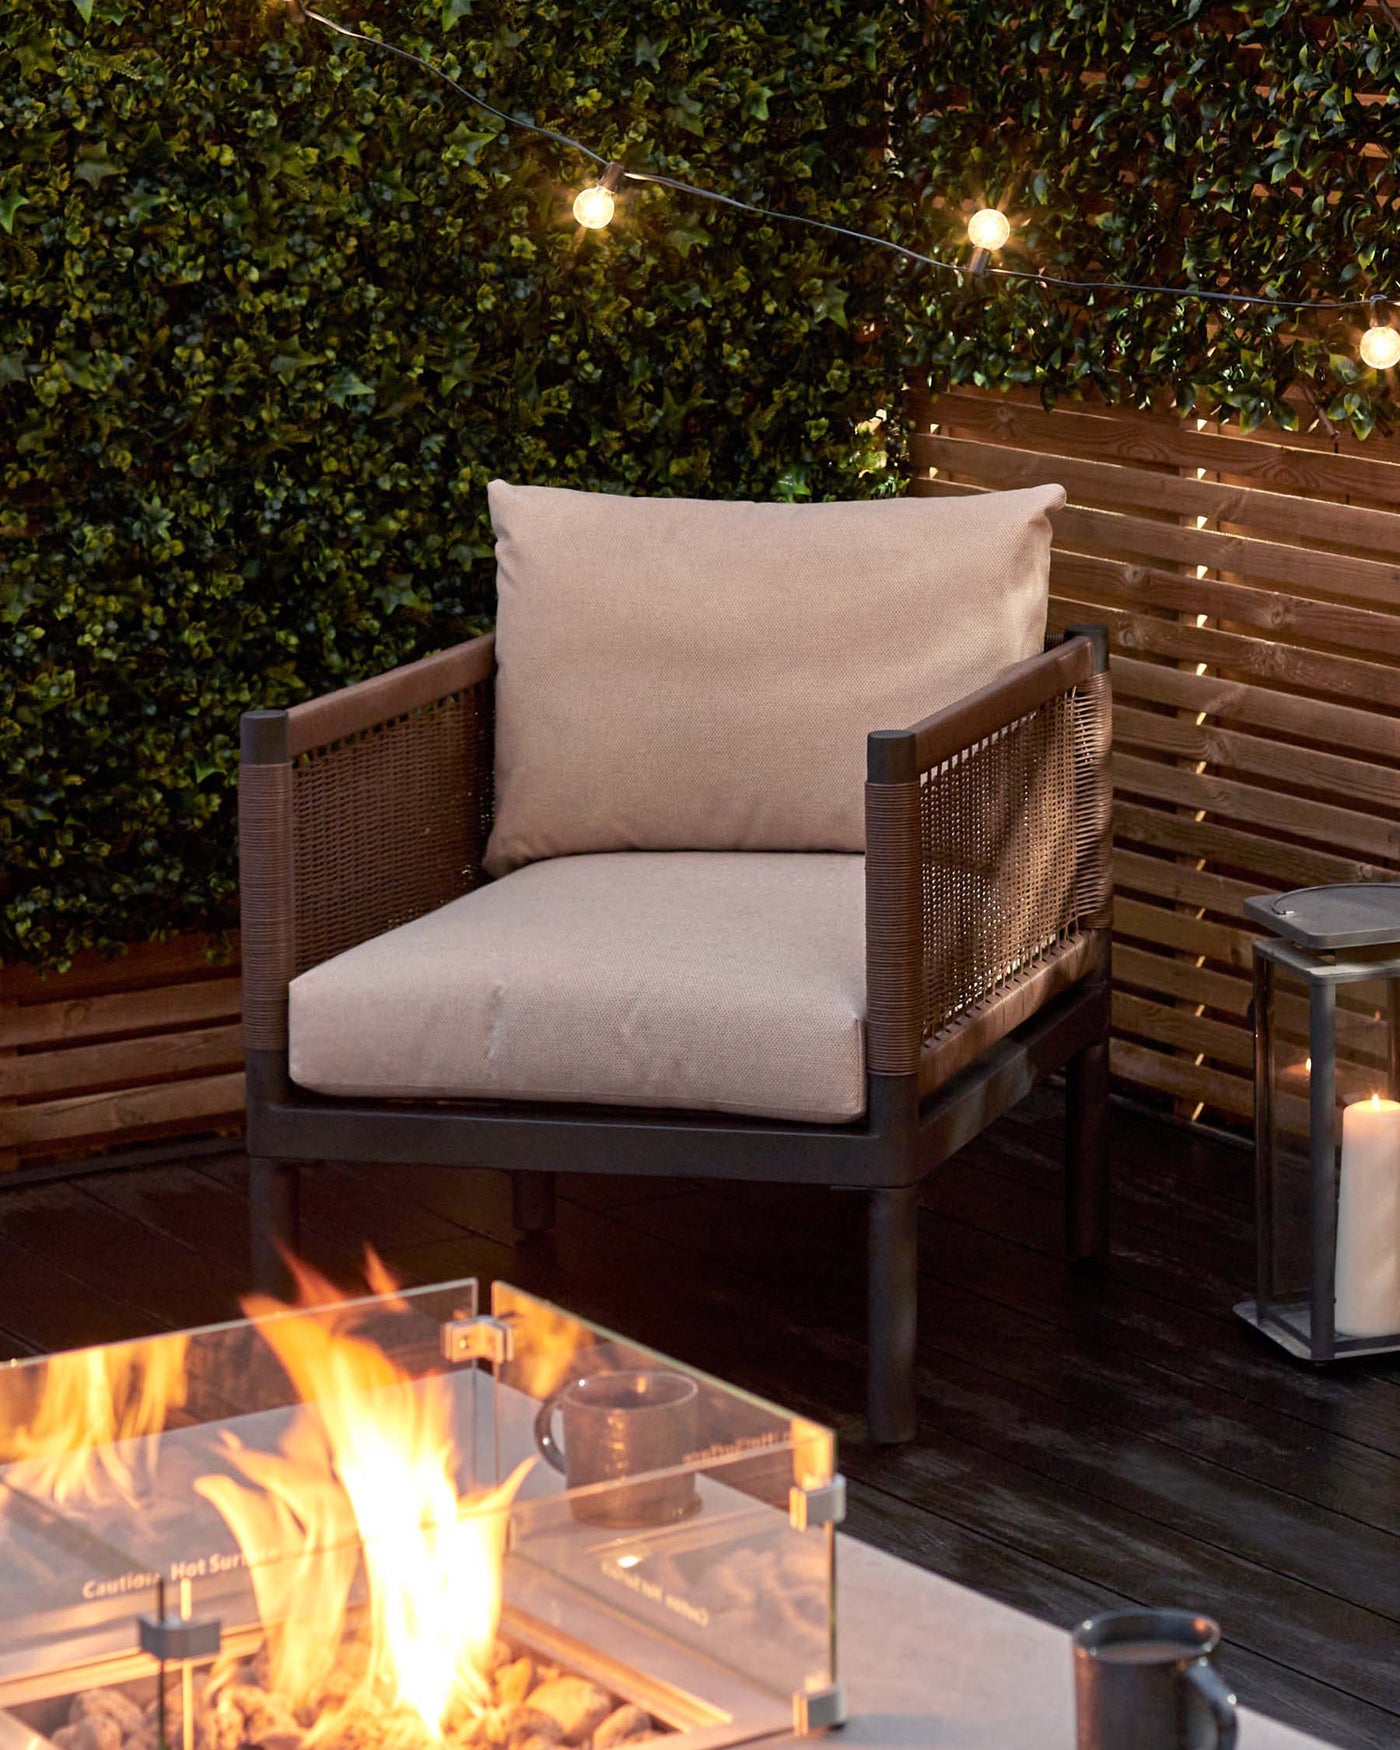 Outdoor lounge chair with a modern design, featuring a sturdy dark frame with wicker accents and thick, comfortable beige cushions, set against an inviting patio backdrop with ambient string lights and a glowing fire pit table.